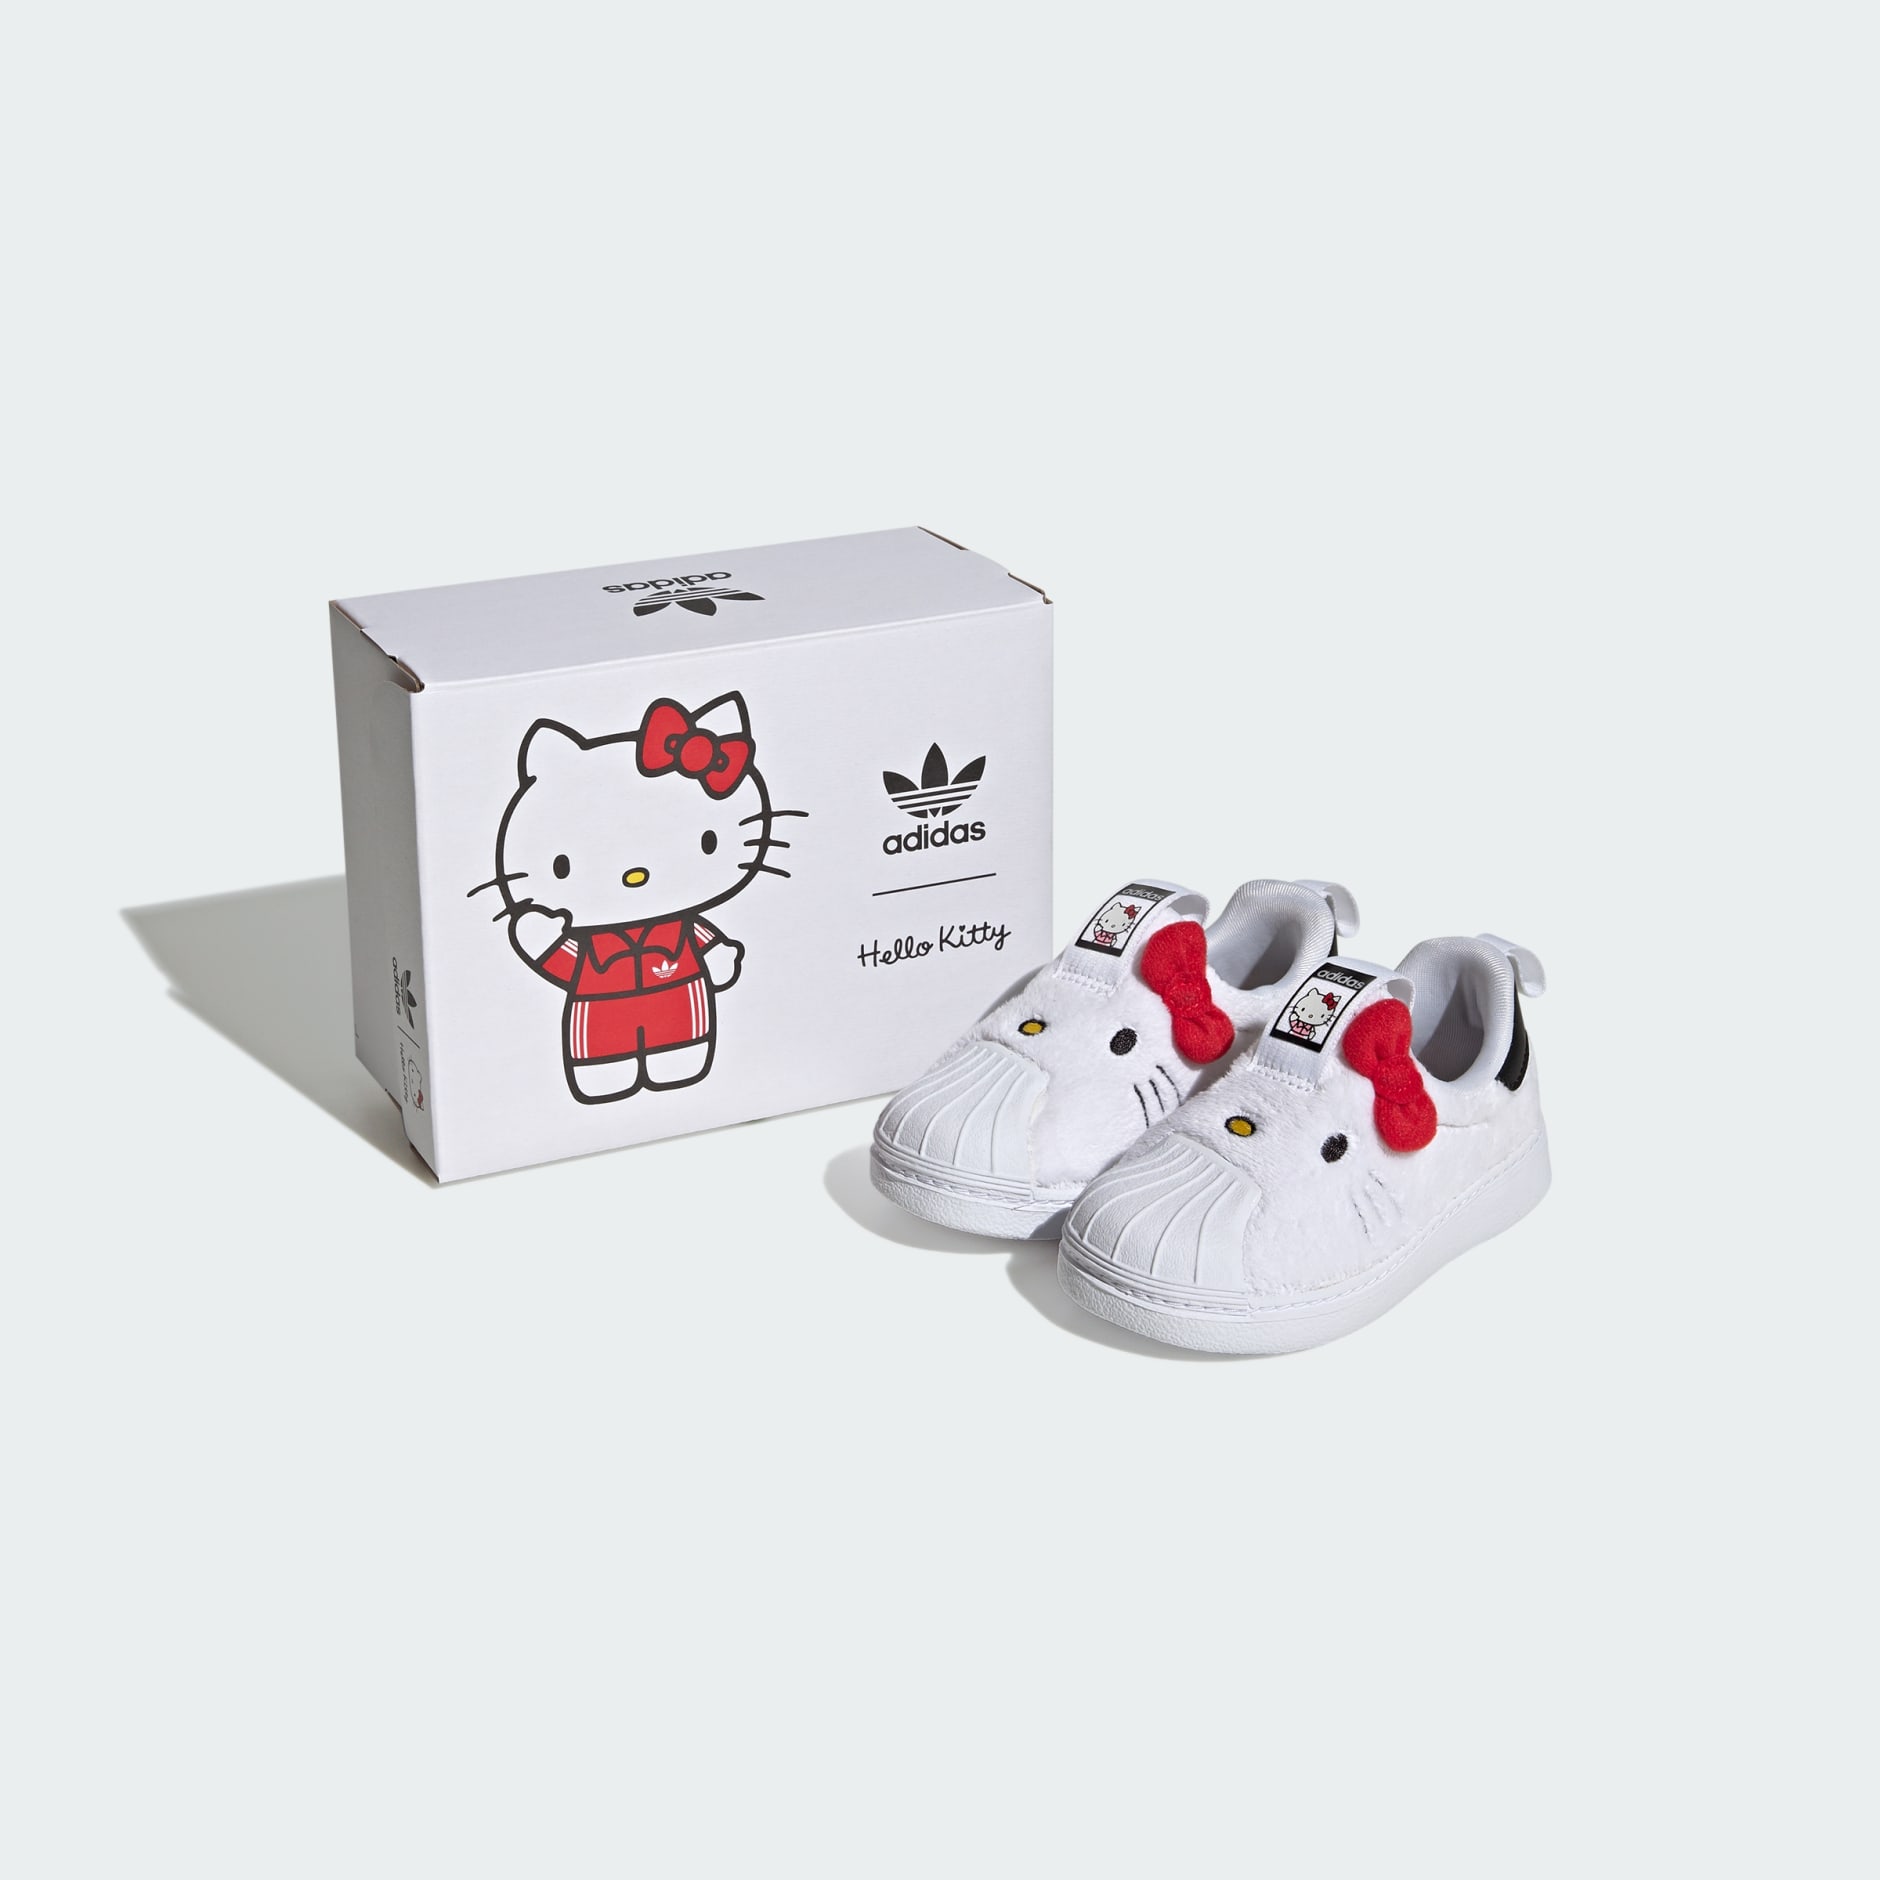 Kids Shoes - adidas Originals x Hello Kitty Superstar 360 Shoes